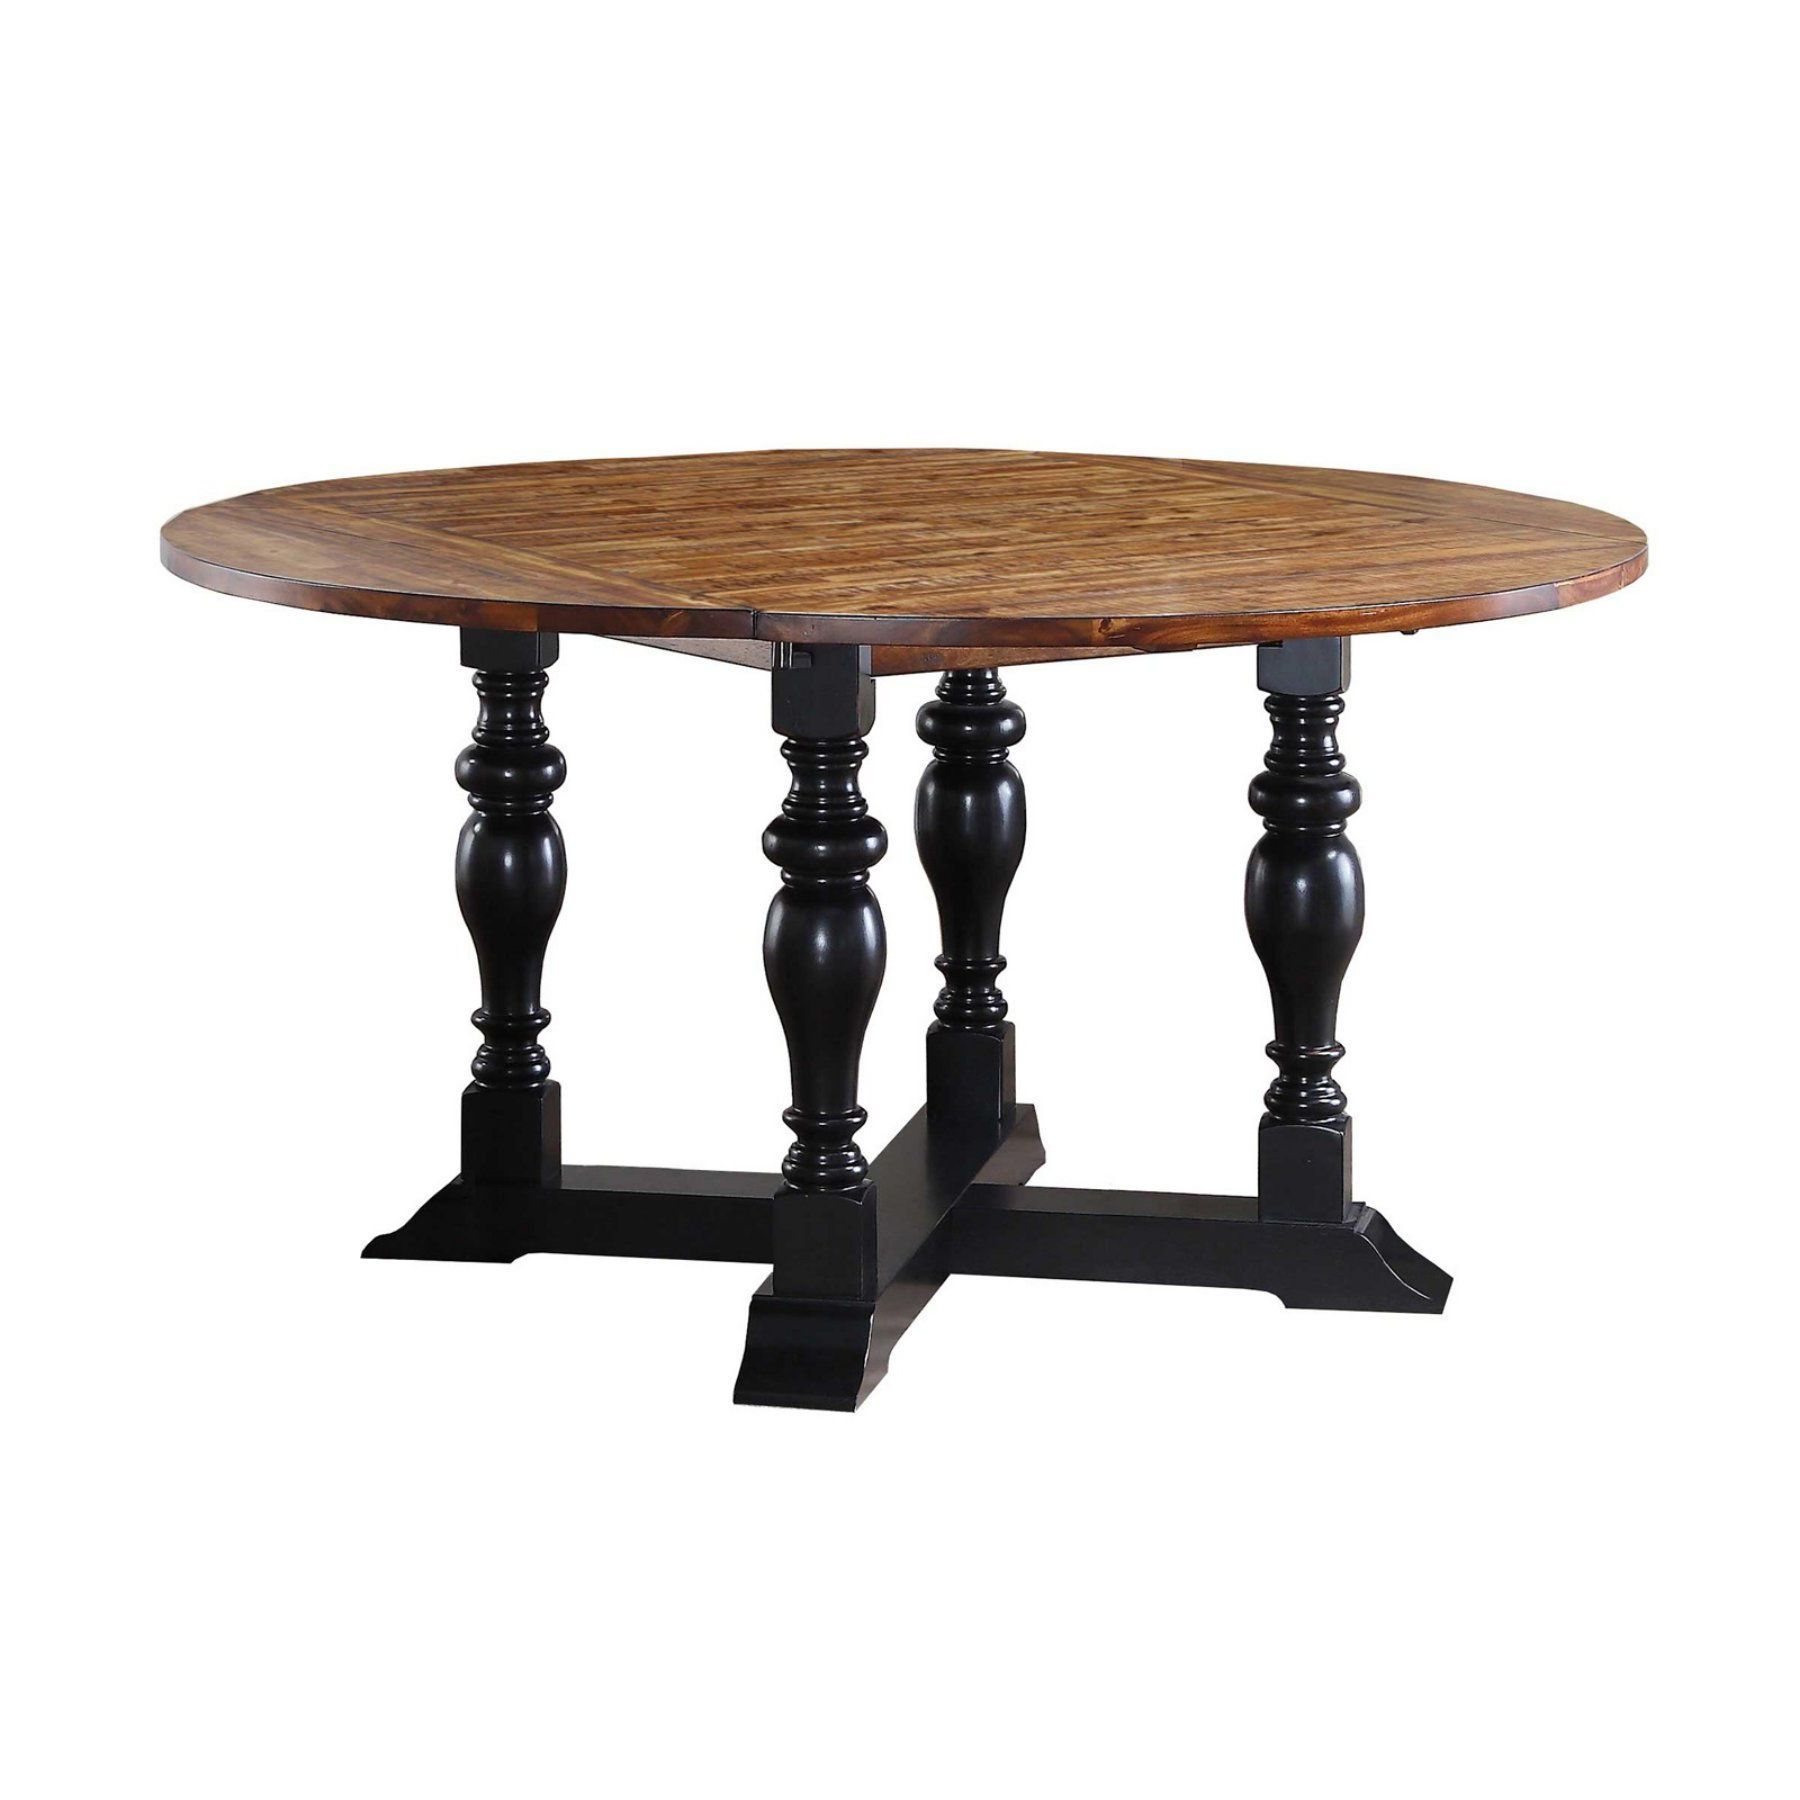 Most Popular Wood Kitchen Dining Tables With Removable Center Leaf Pertaining To Winners Only 60 In. Drop Leaf Round Dining Table – Dw36060 (Photo 5 of 25)